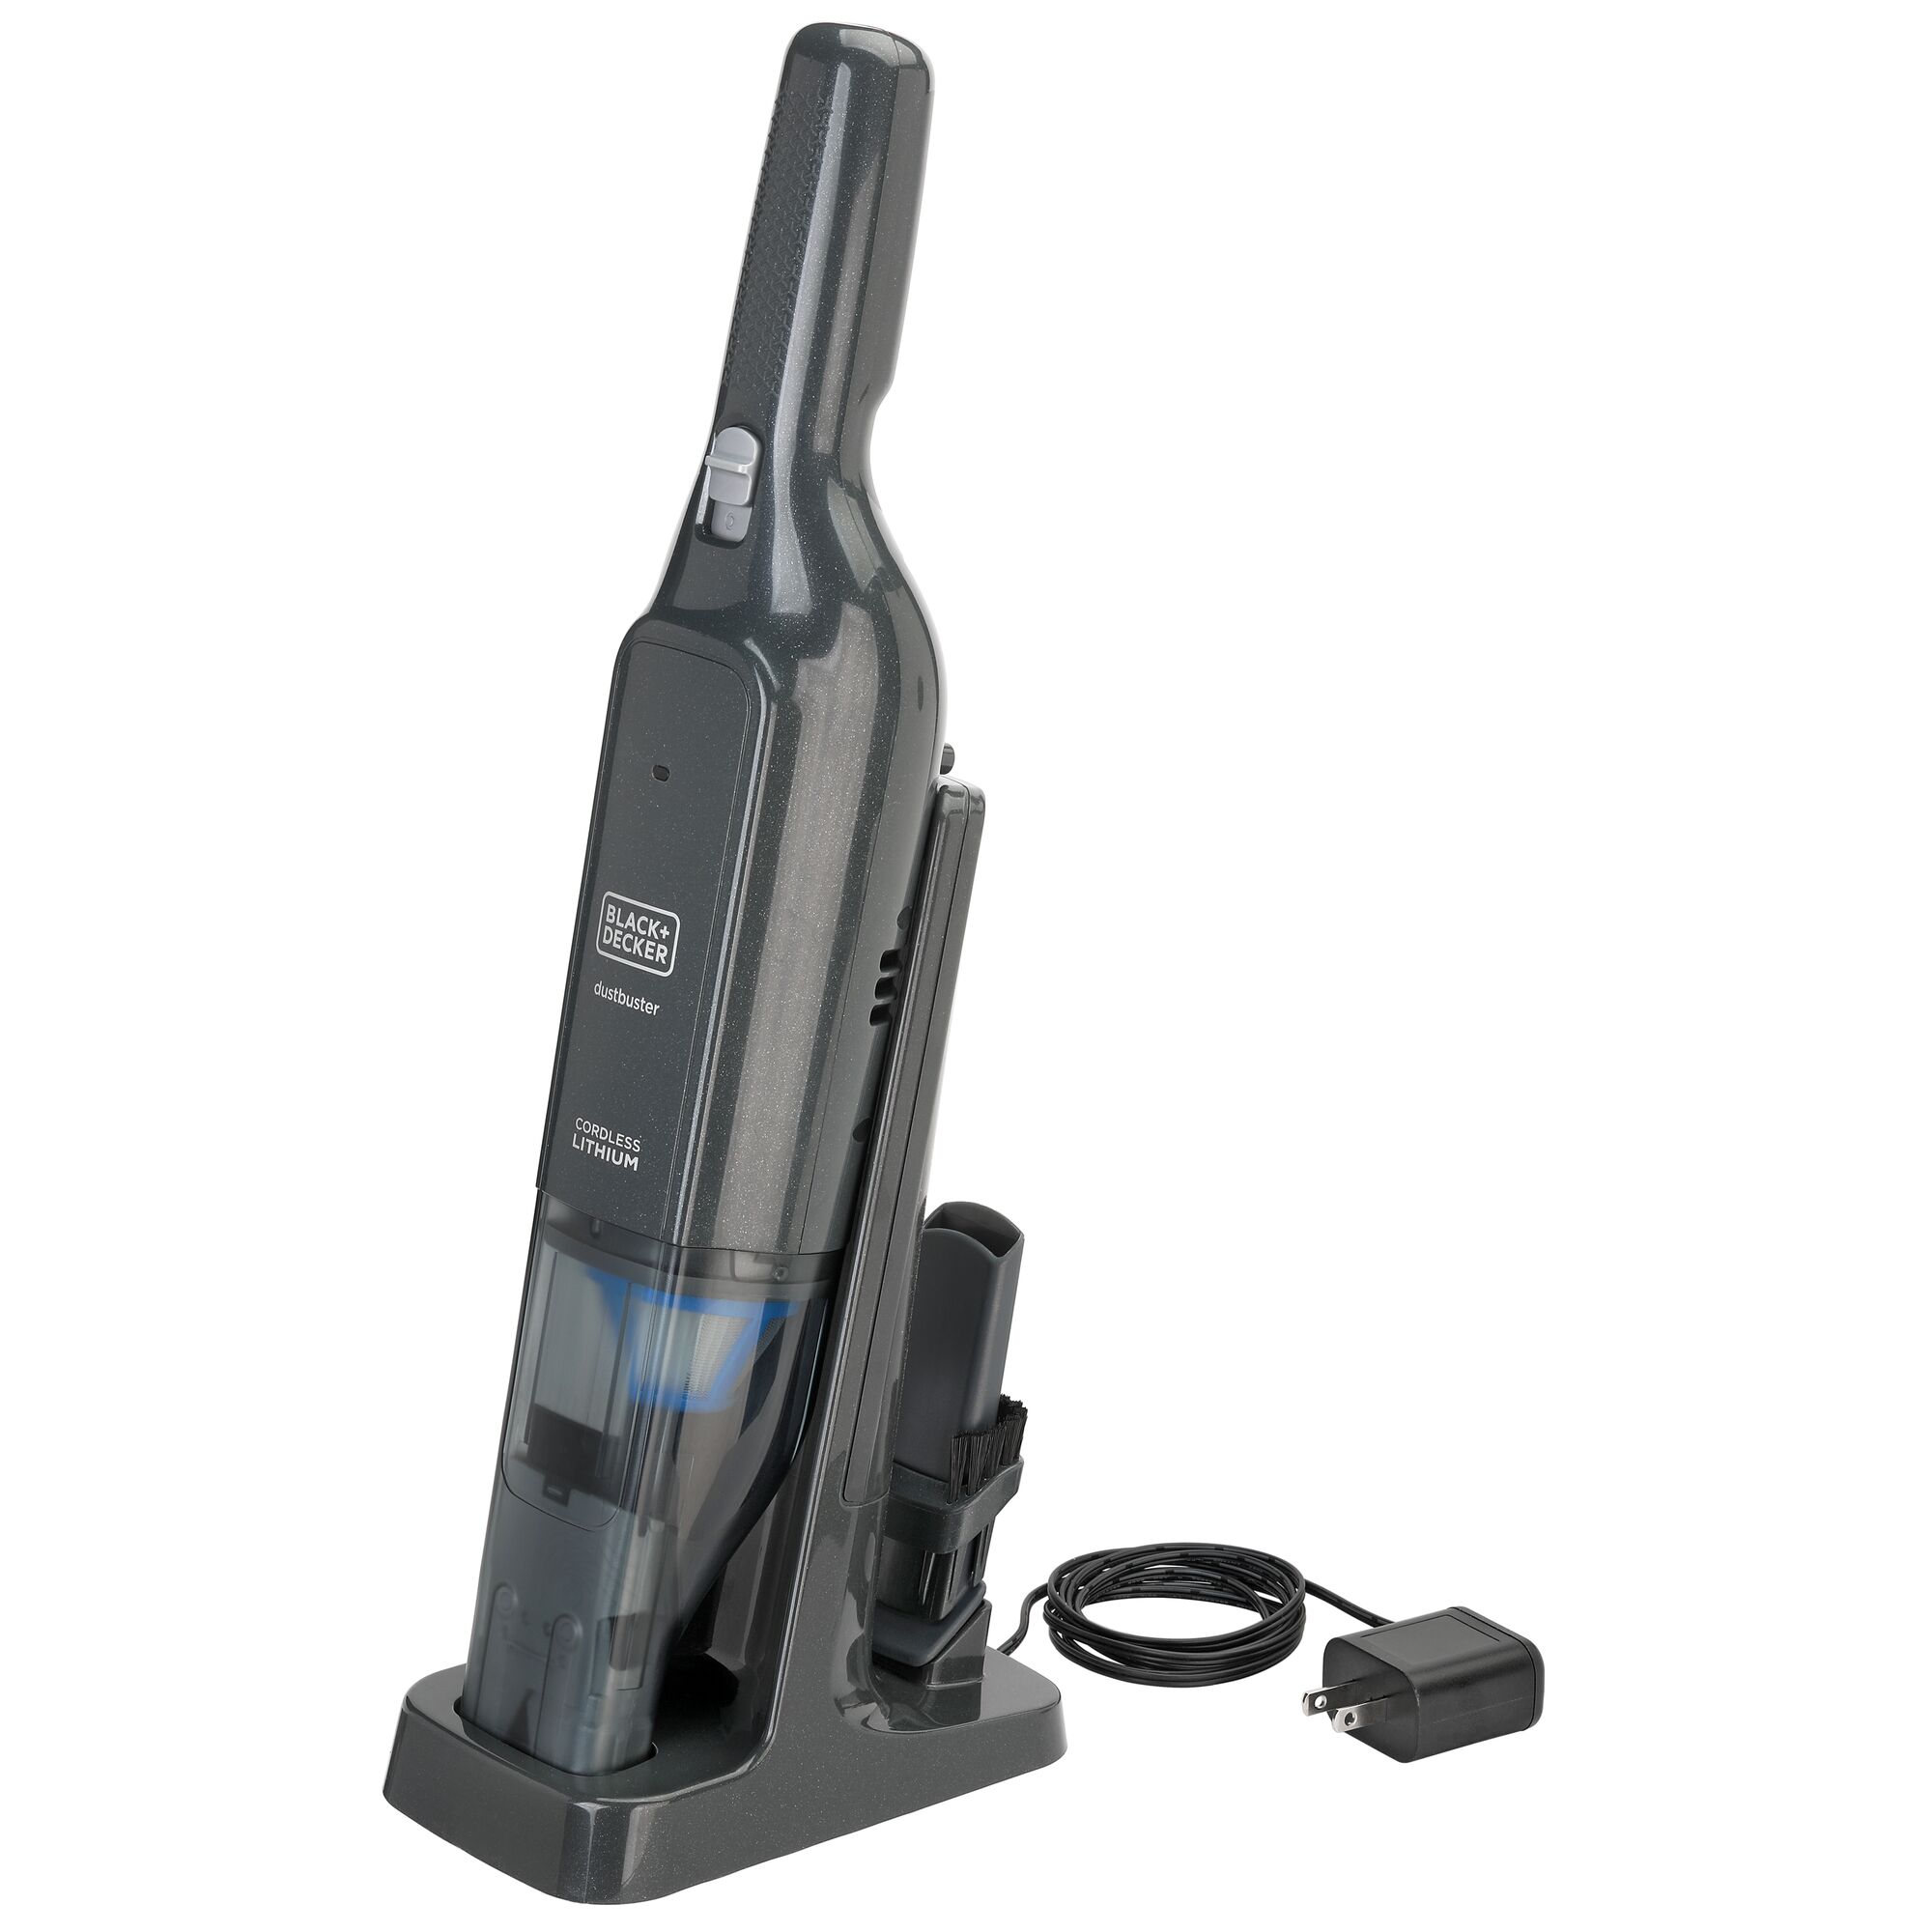 Base charger feature of dustbuster 12 volt max advancedclean cordless hand vacuum.